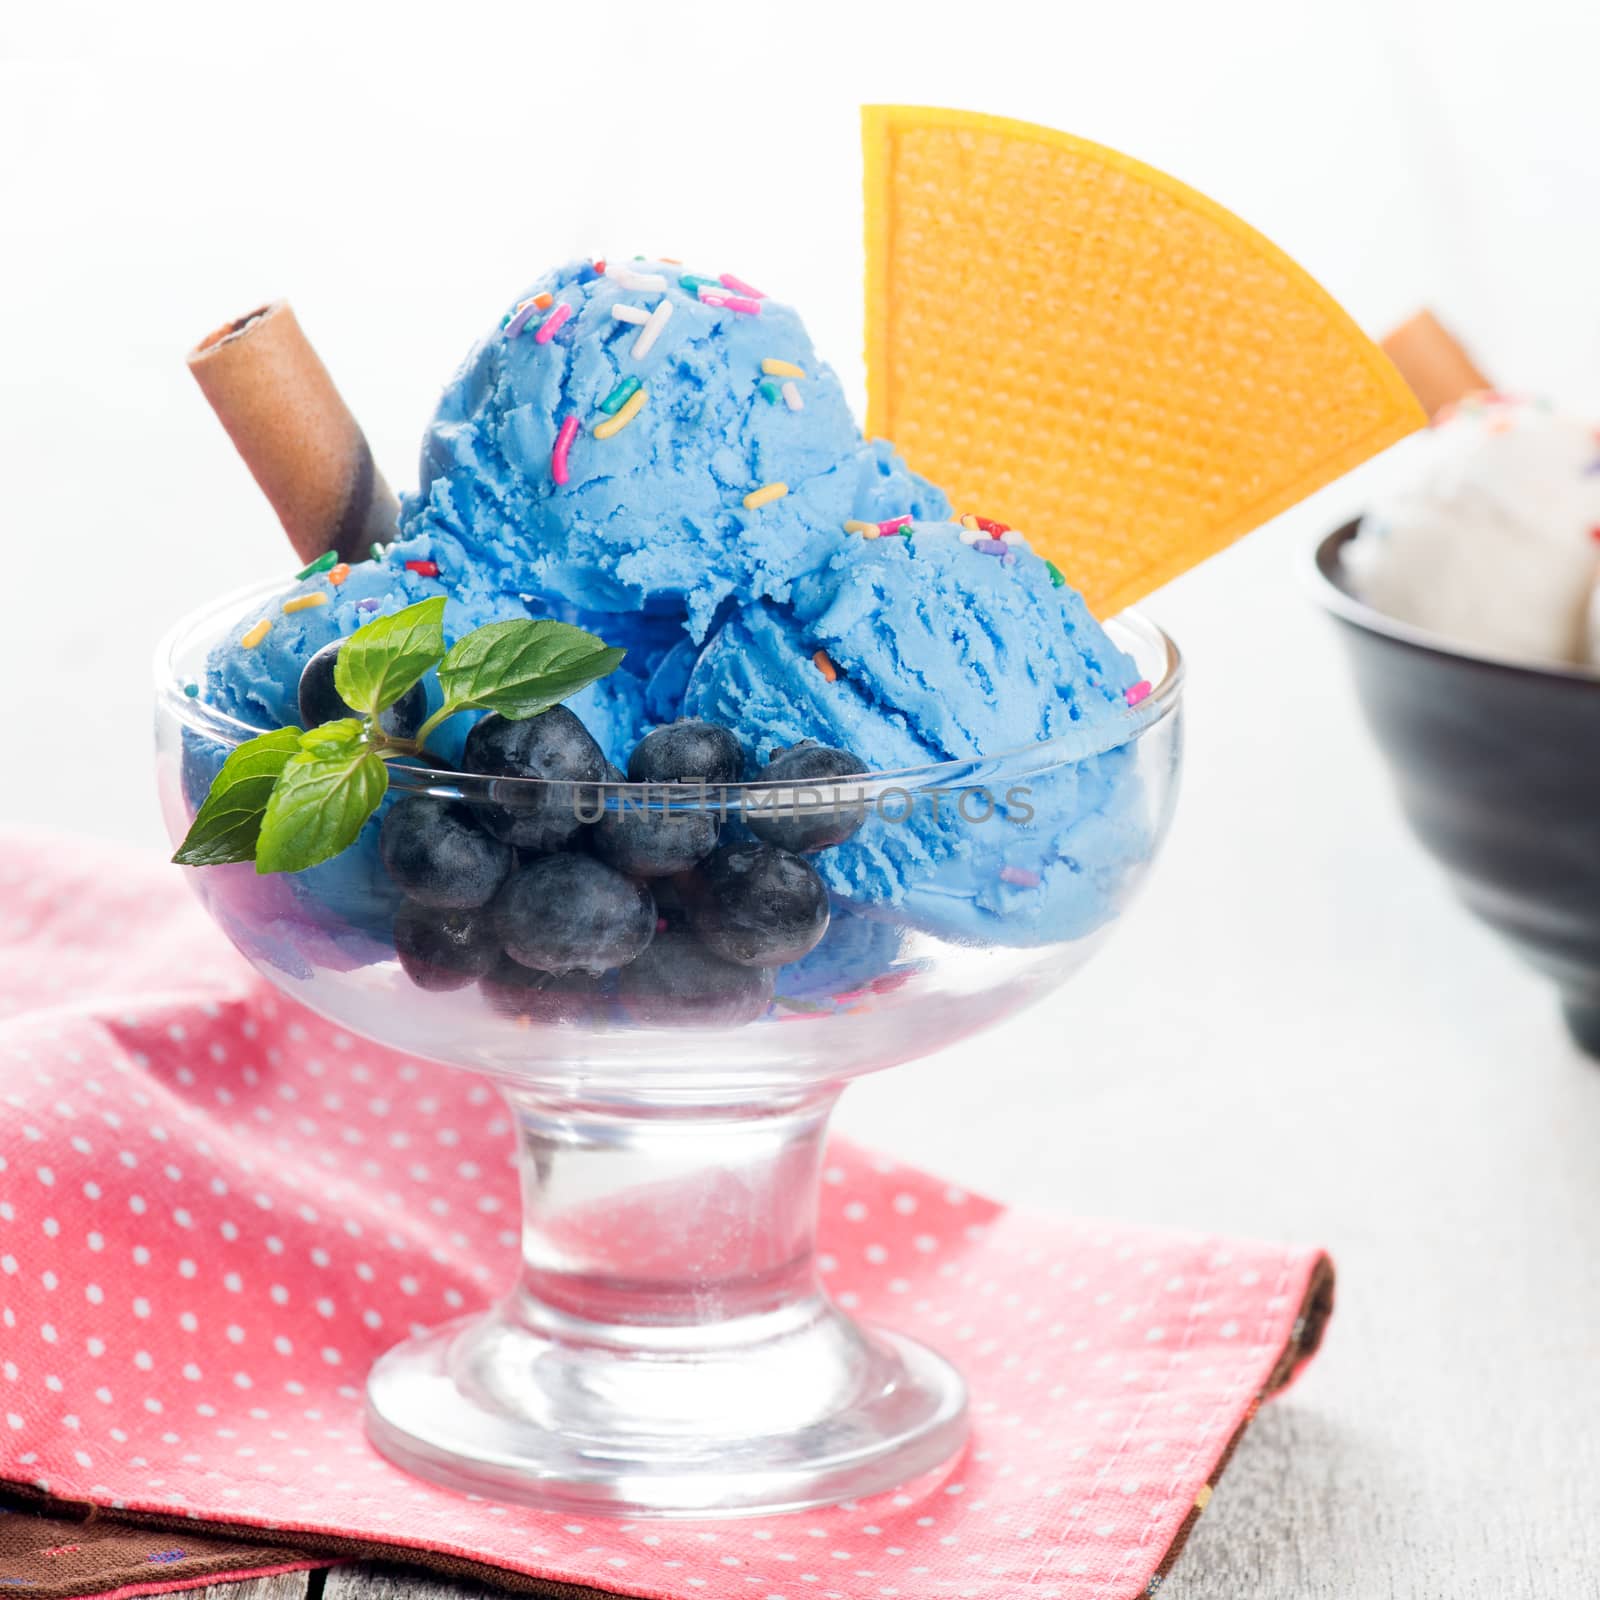 Blue ice cream in cup with blueberry fruits.